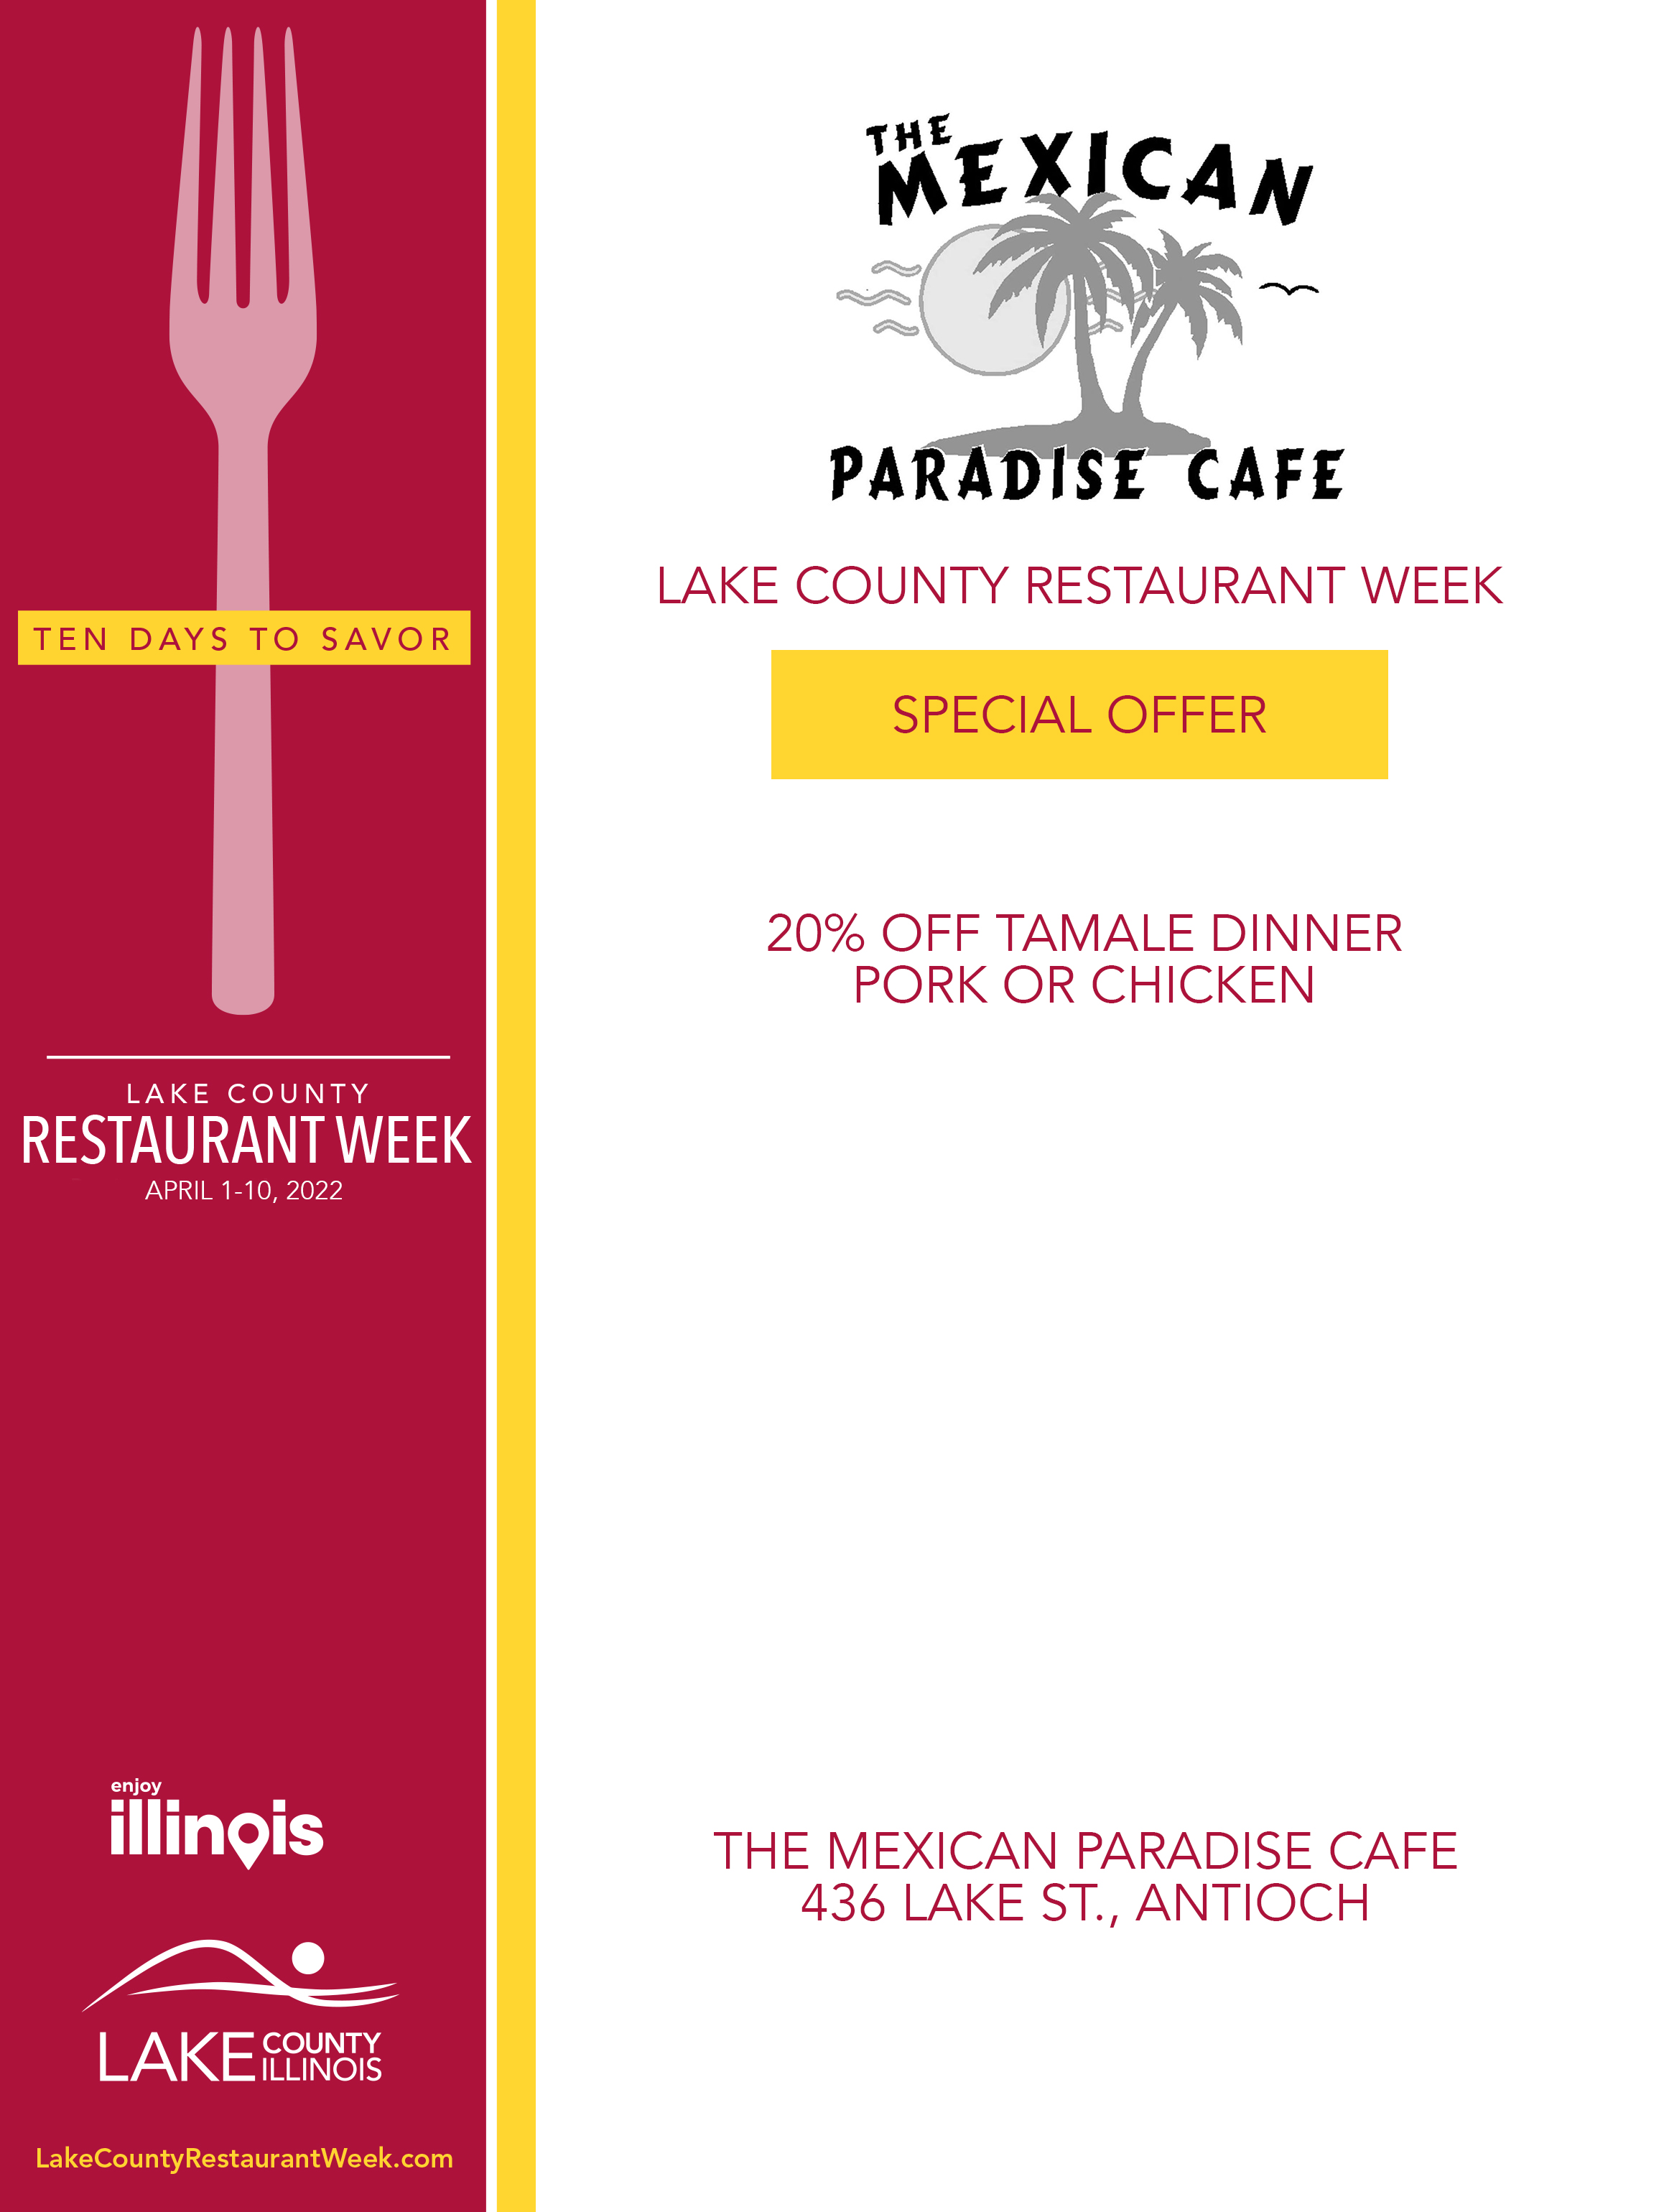 The Mexican Paradise Cafe in Antioch's LCRW Menu